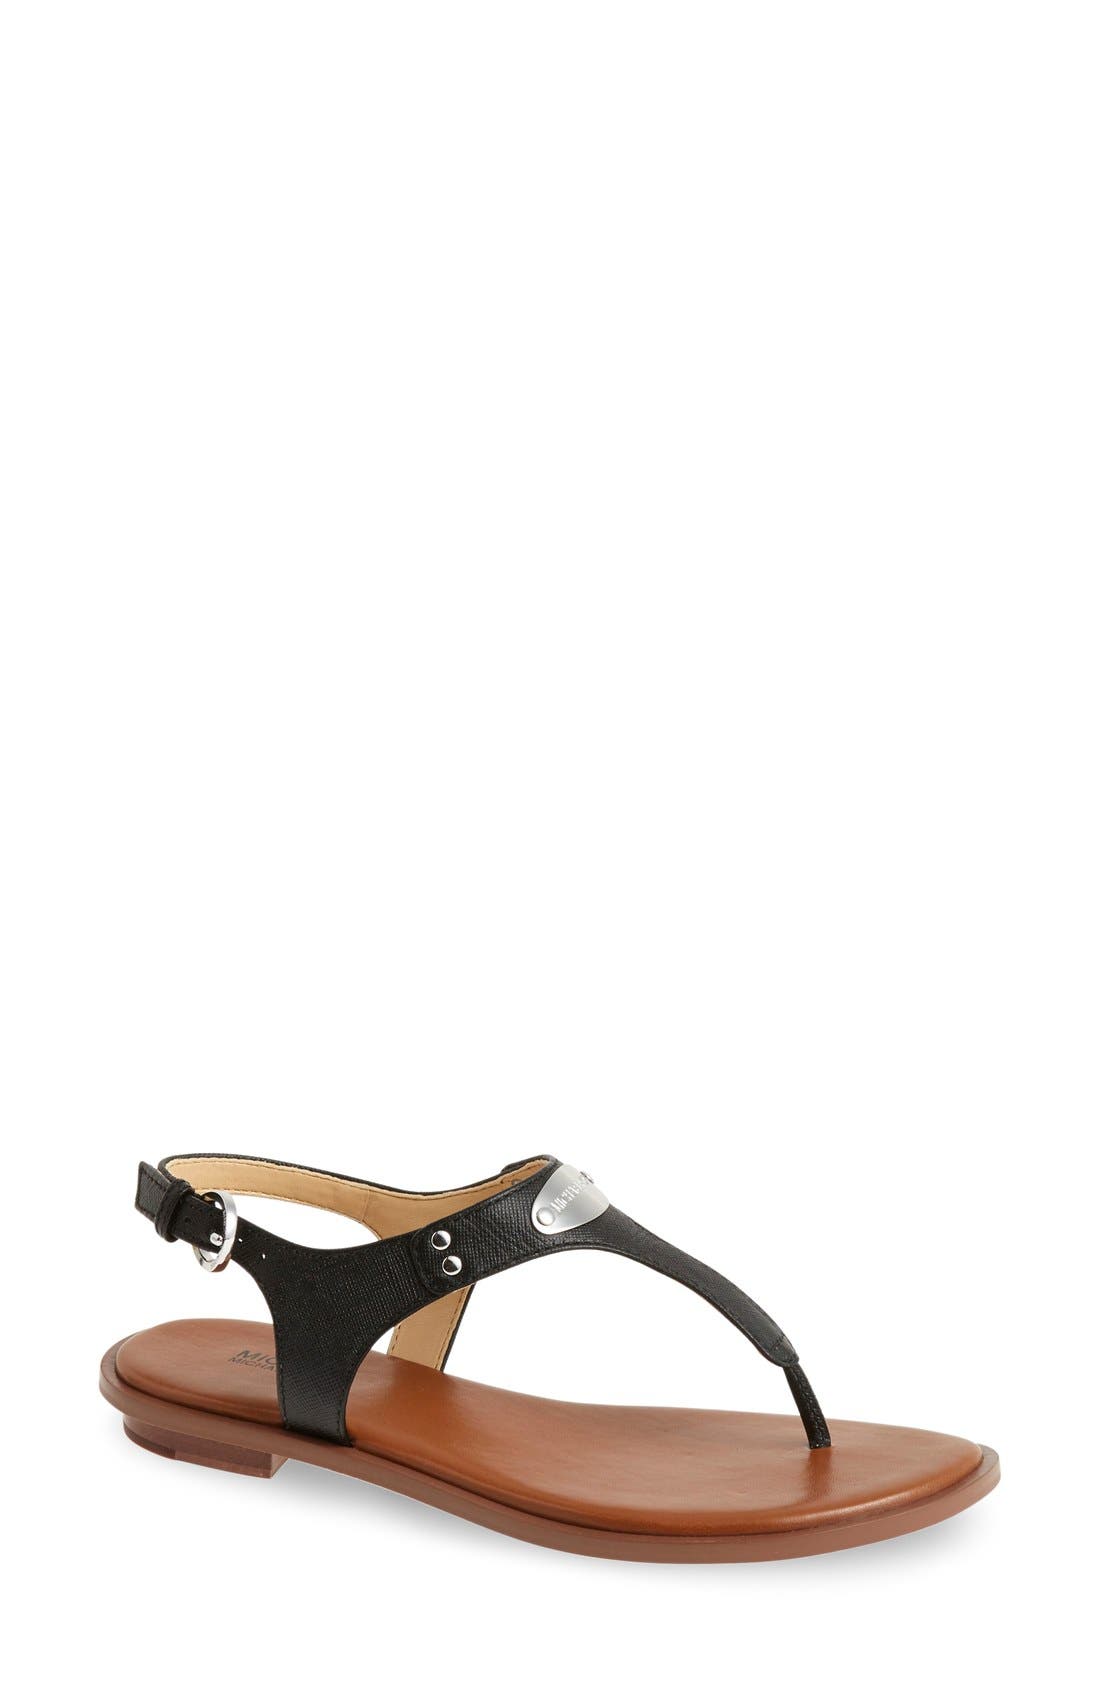 UPC 886056831924 product image for MICHAEL Michael Kors 'Plate' Thong Sandal in Black at Nordstrom, Size 7 | upcitemdb.com